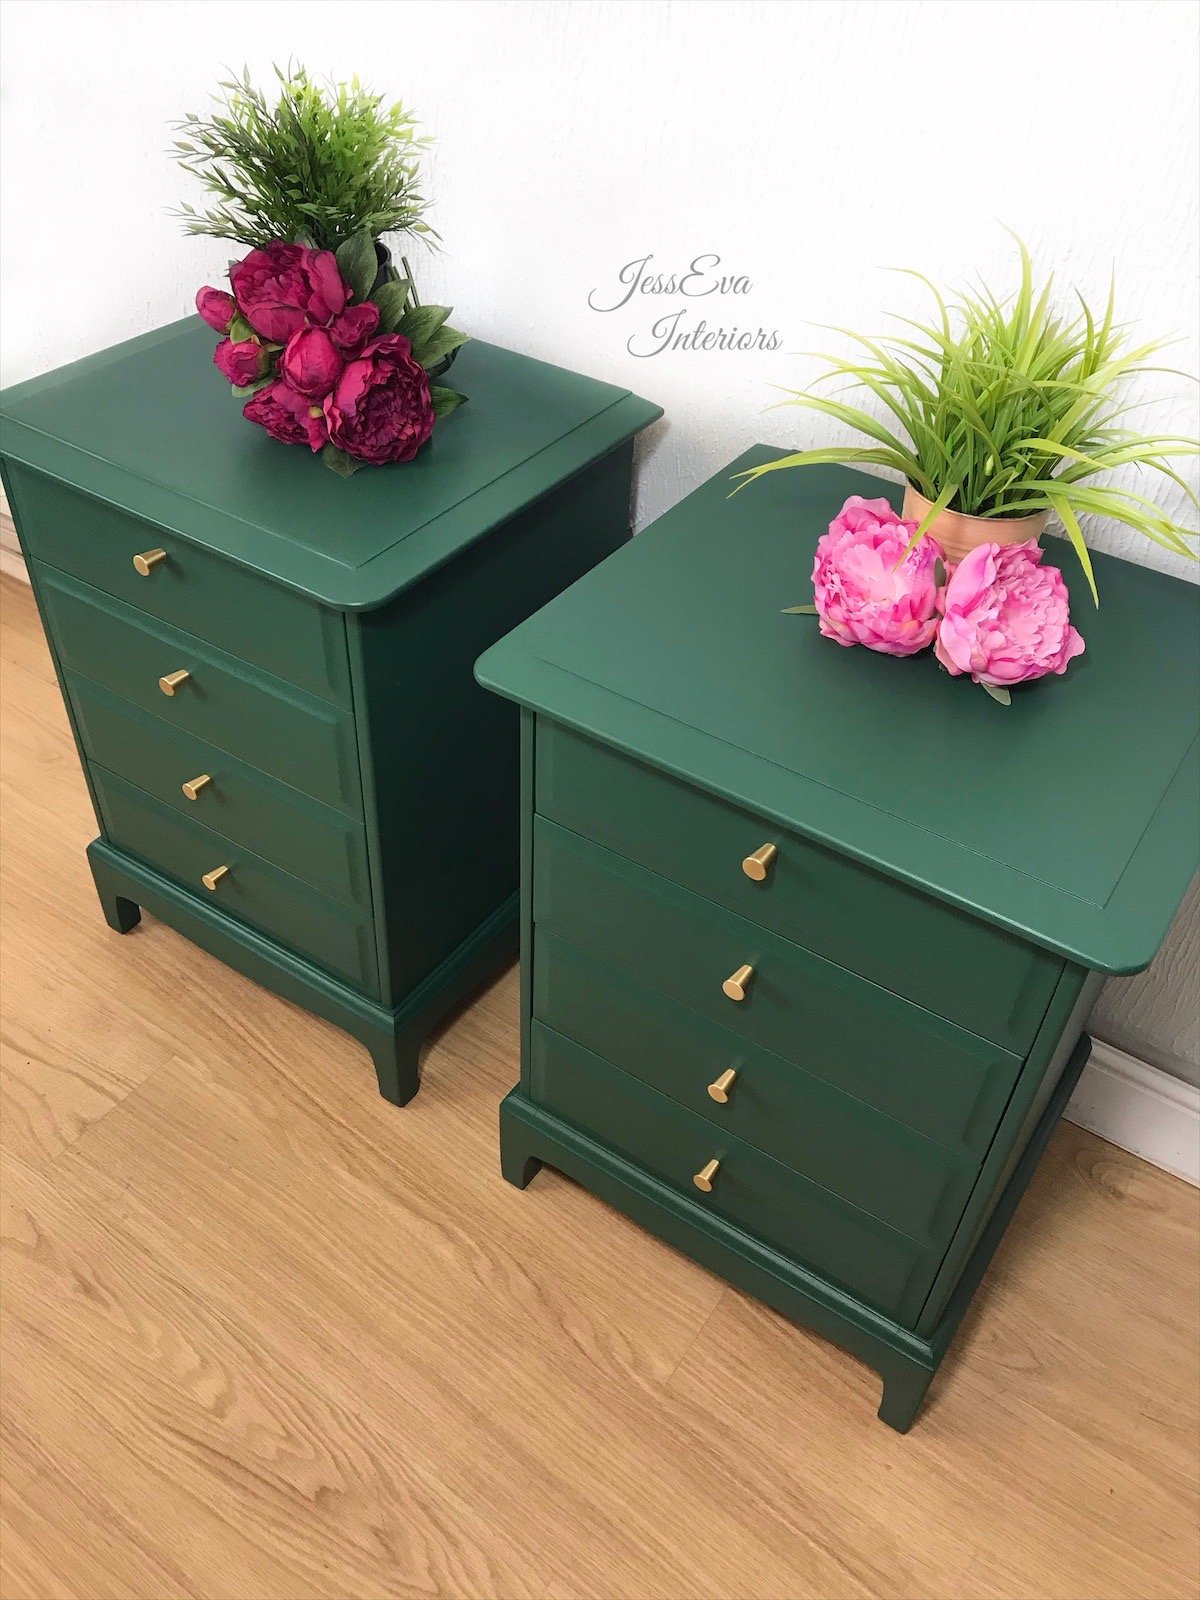 Two pairs of Stag Bedside Tables - commission 